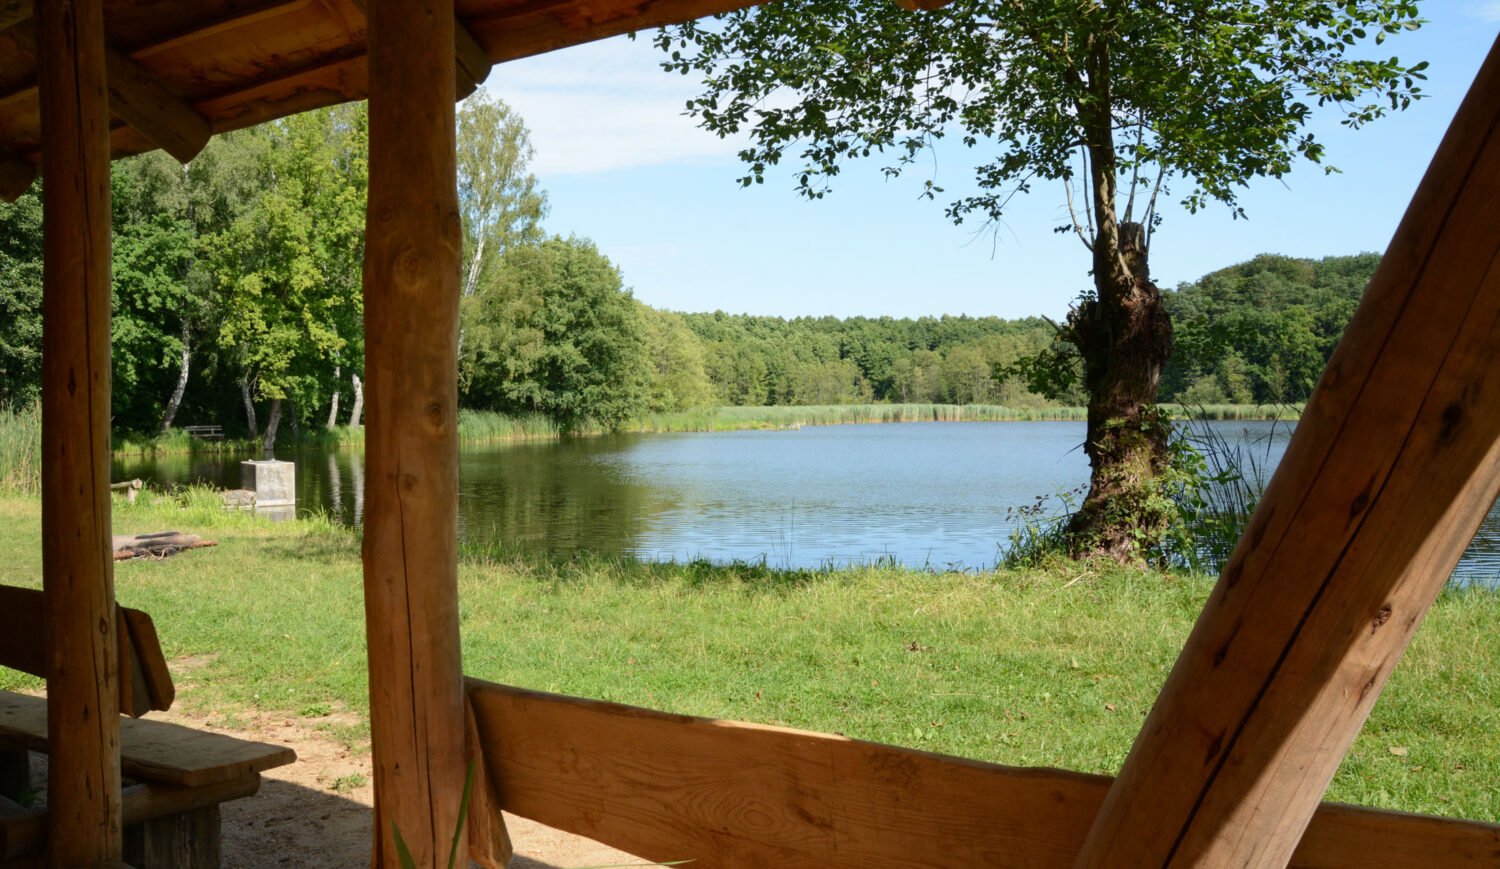 Want to take a break? At the Voigtsdorf ponds you can take a break with a beautiful view © Christina Korr